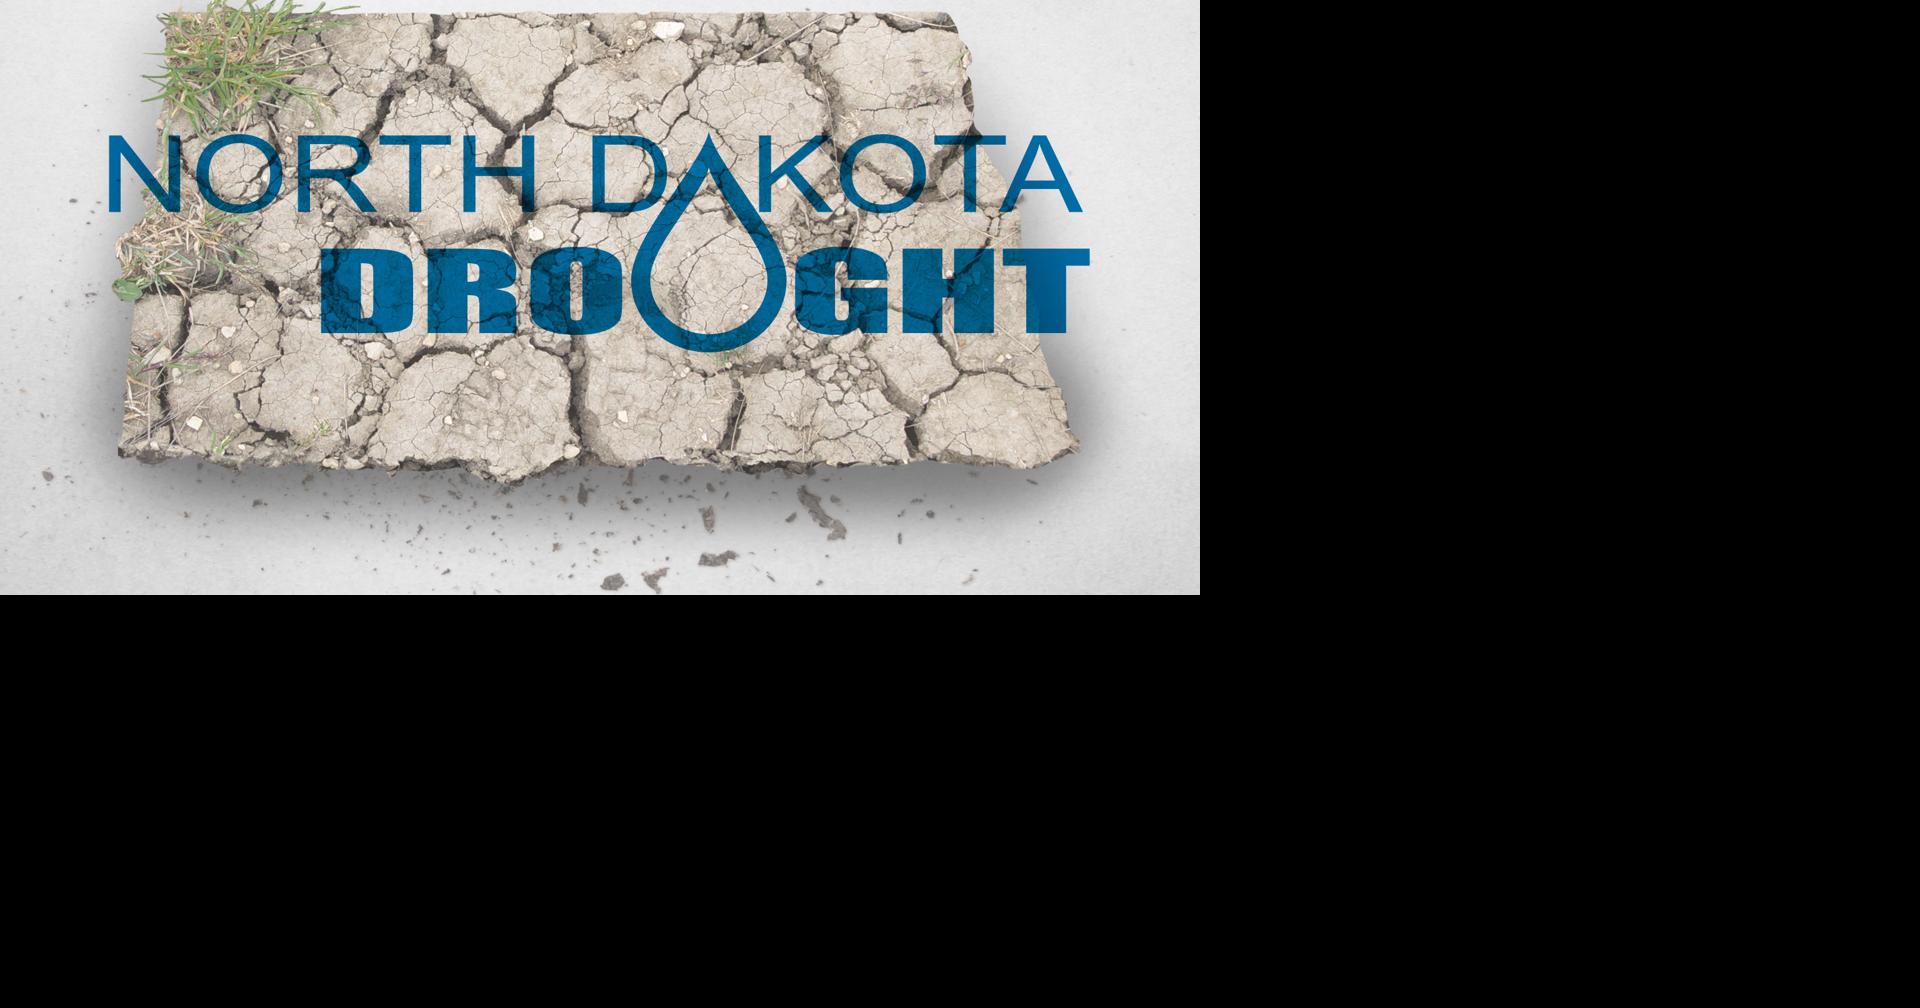 Moderate drought reemerges in western North Dakota; cooler weekend in store